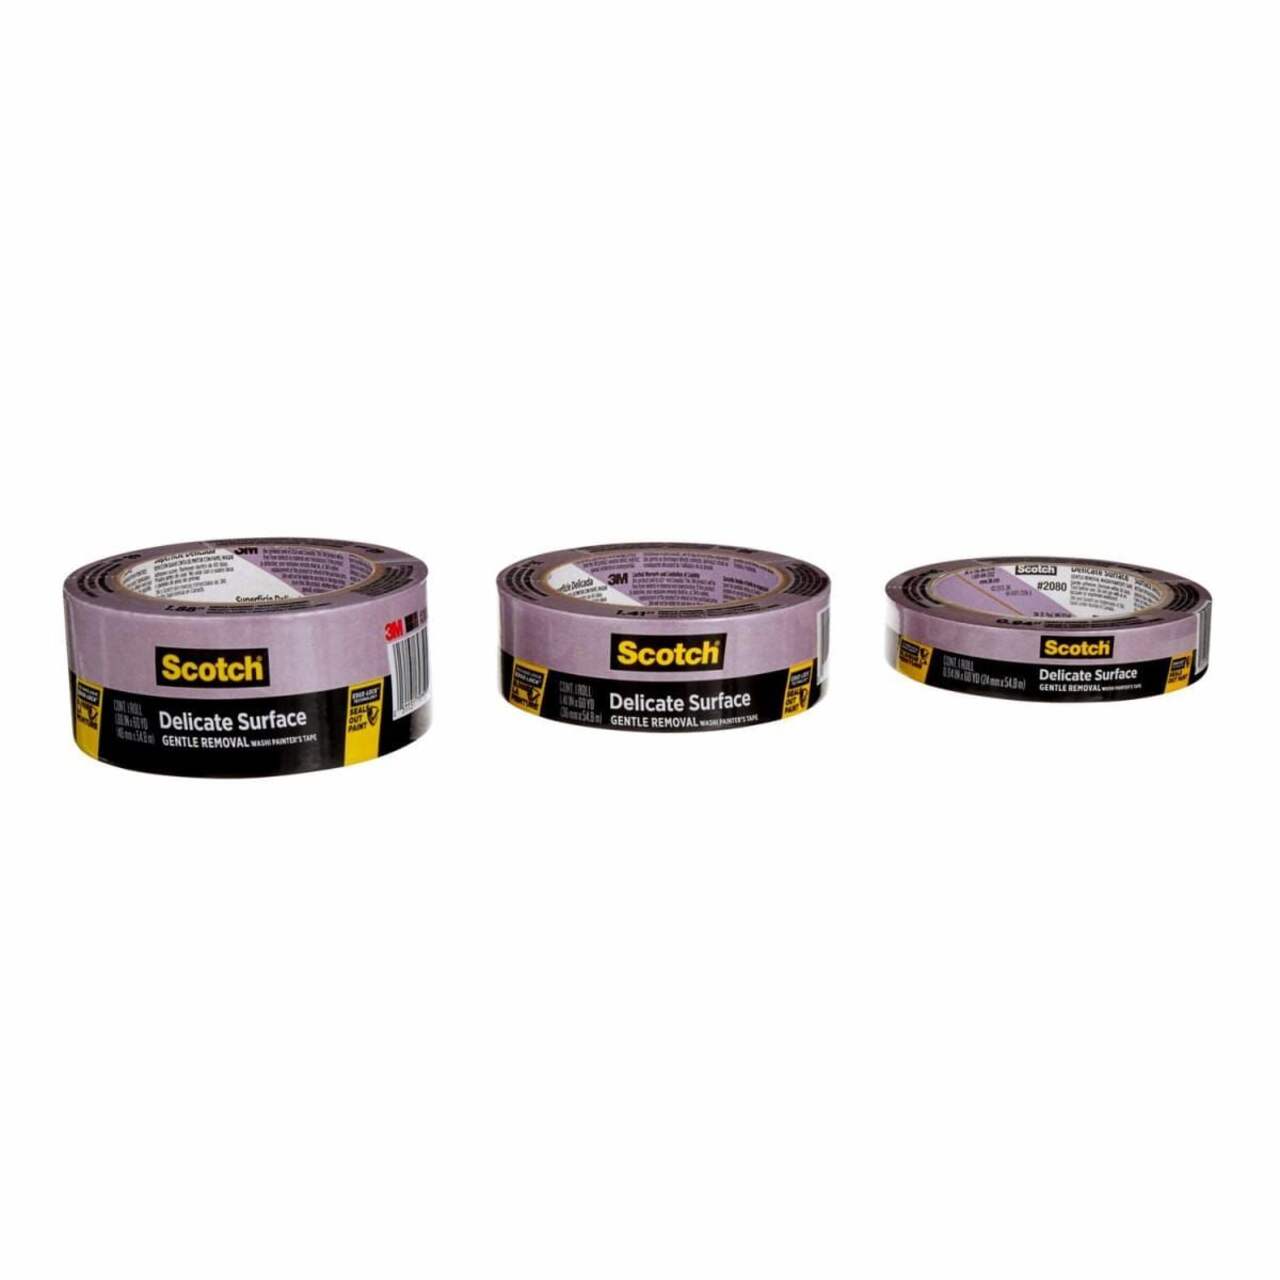 Buy Scotch Delicate Surface Painter's Tape Pink